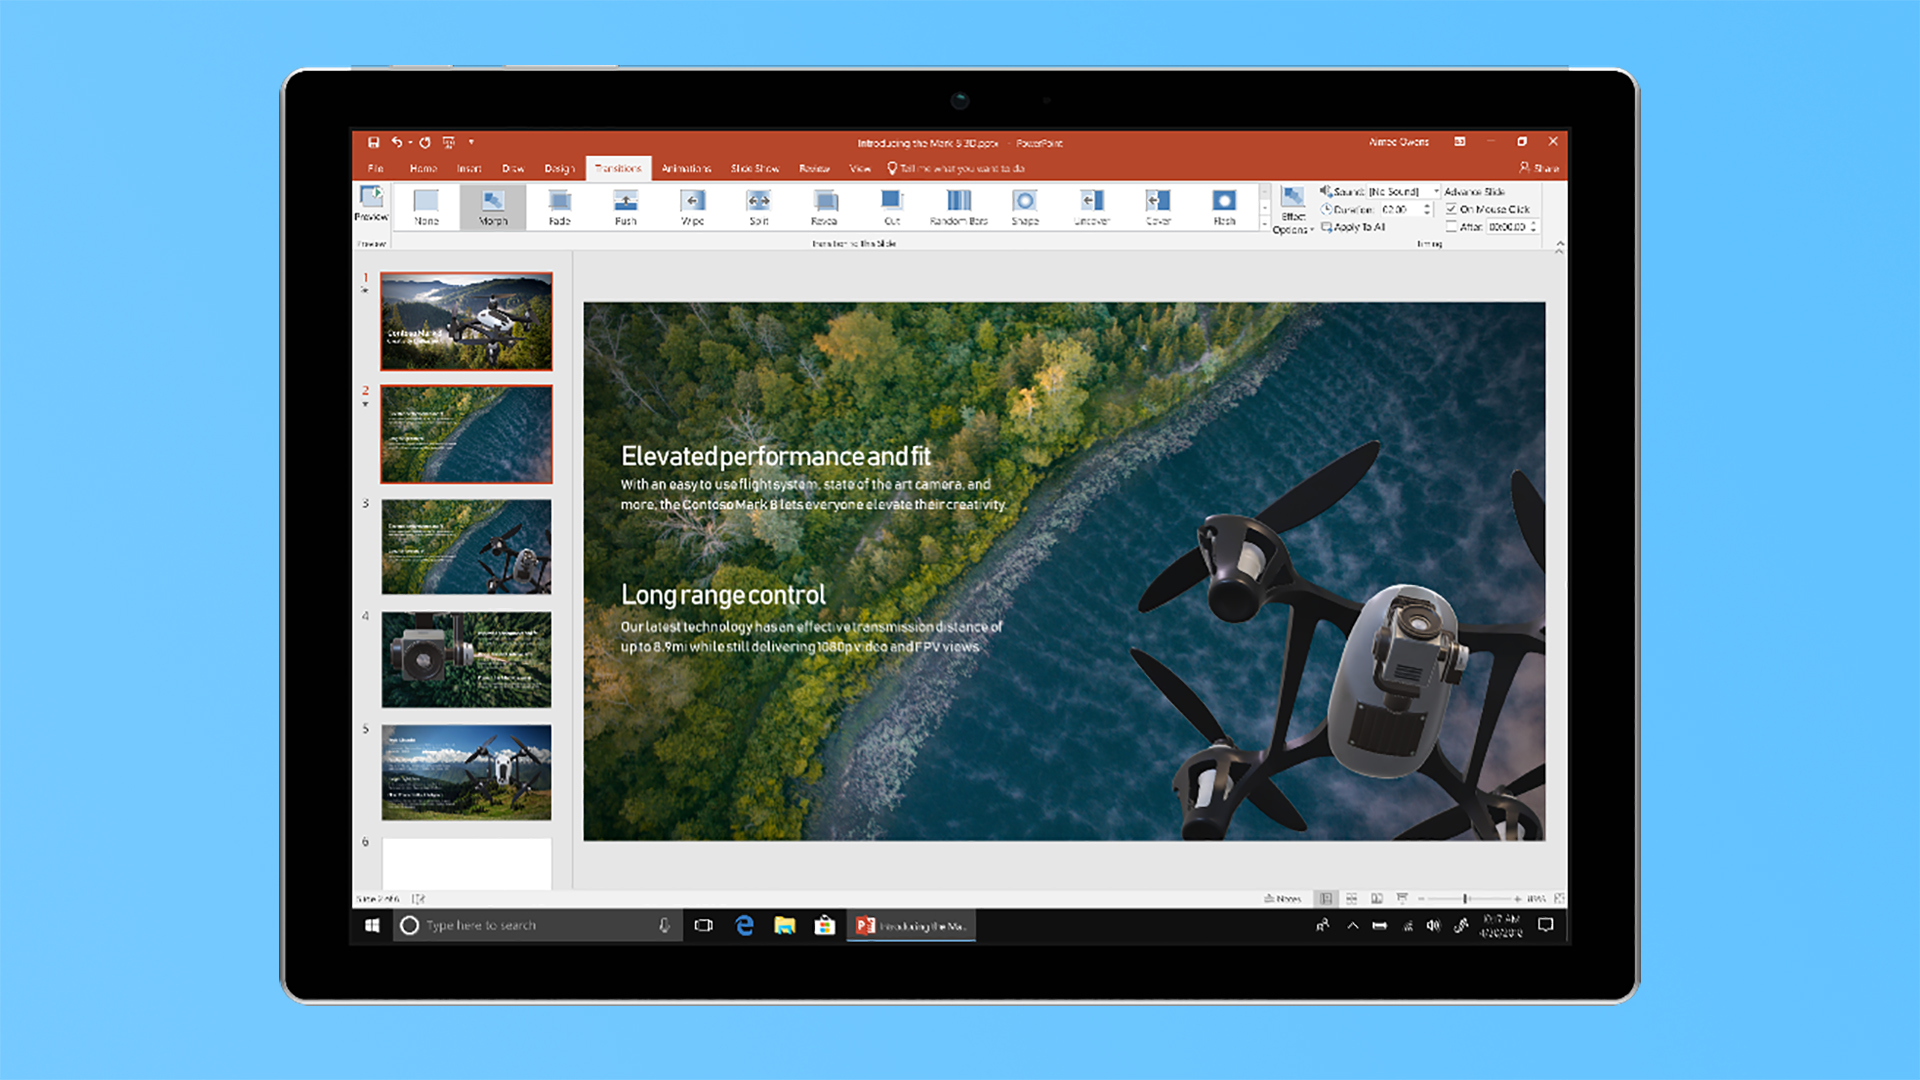 activate office 2016 for mac for free